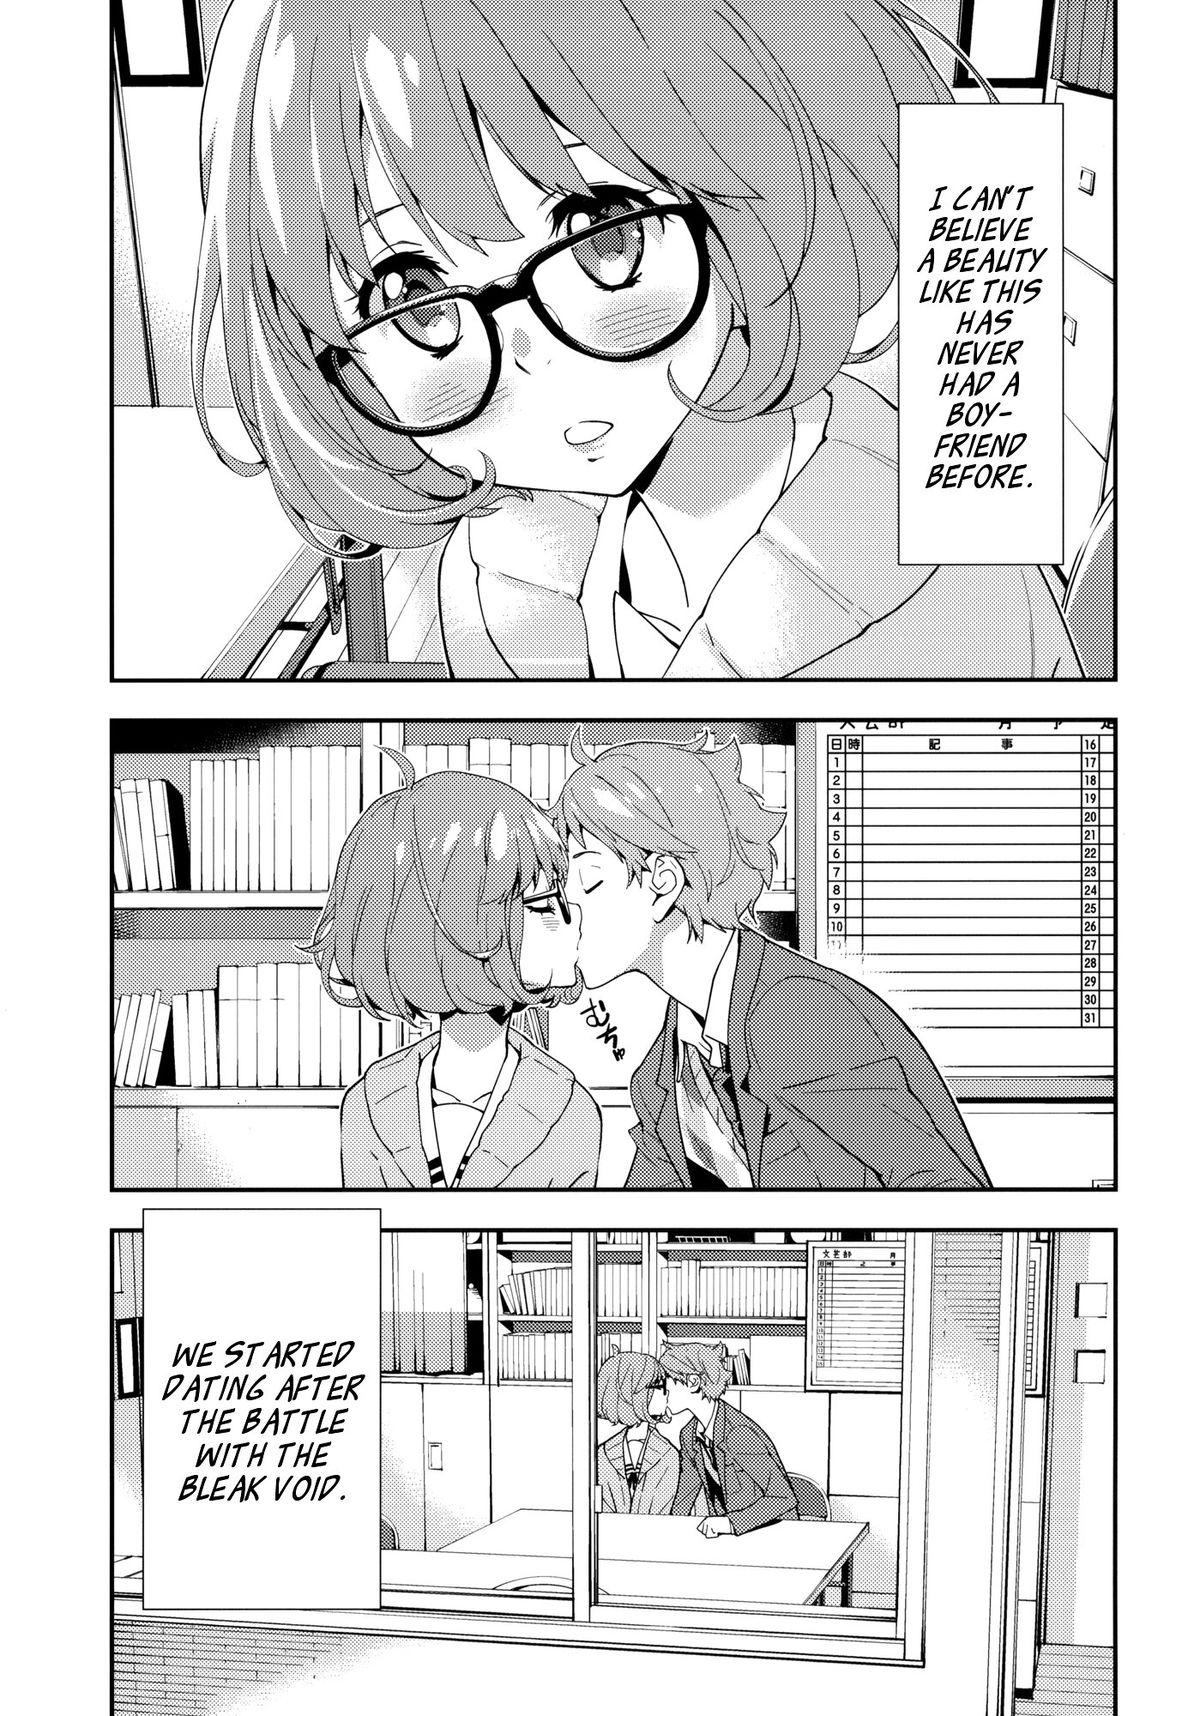 Best Blow Job Ever EXCLUDE - Kyoukai no kanata Butts - Page 4